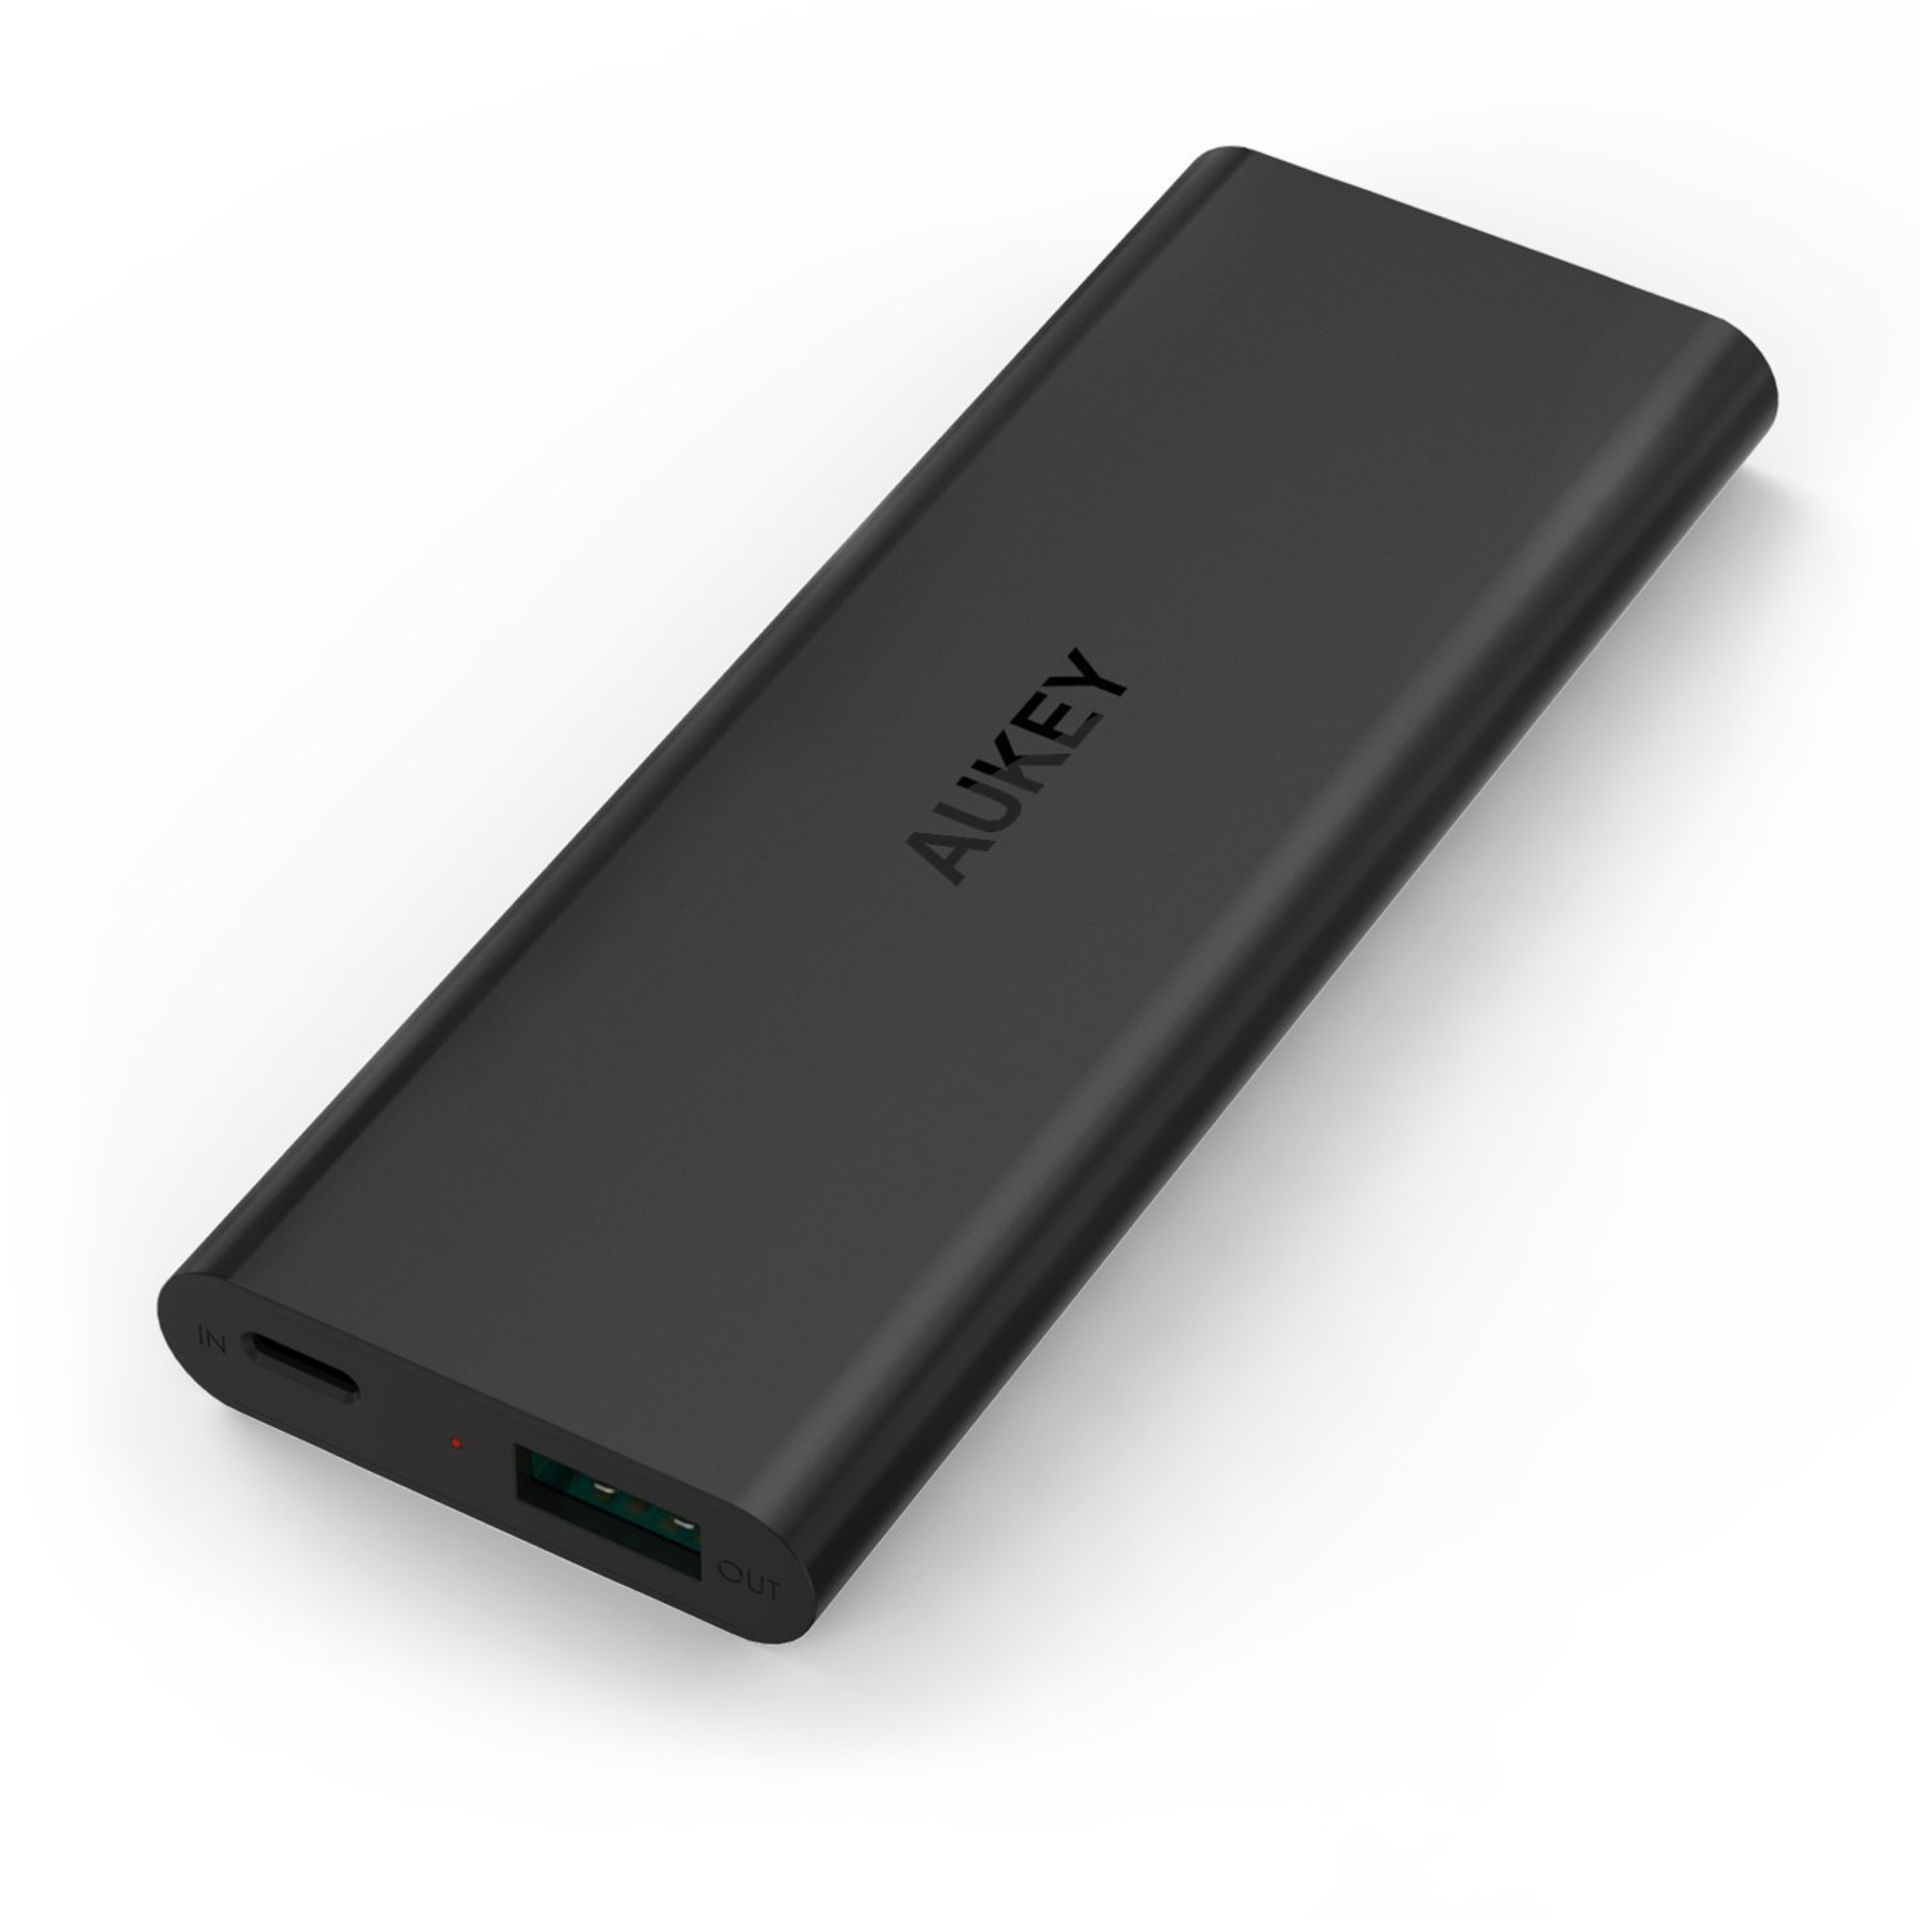 V Brand New 3600 mAh Ultra Slim External Battery Charger X 2 YOUR BID PRICE TO BE MULTIPLIED BY TWO